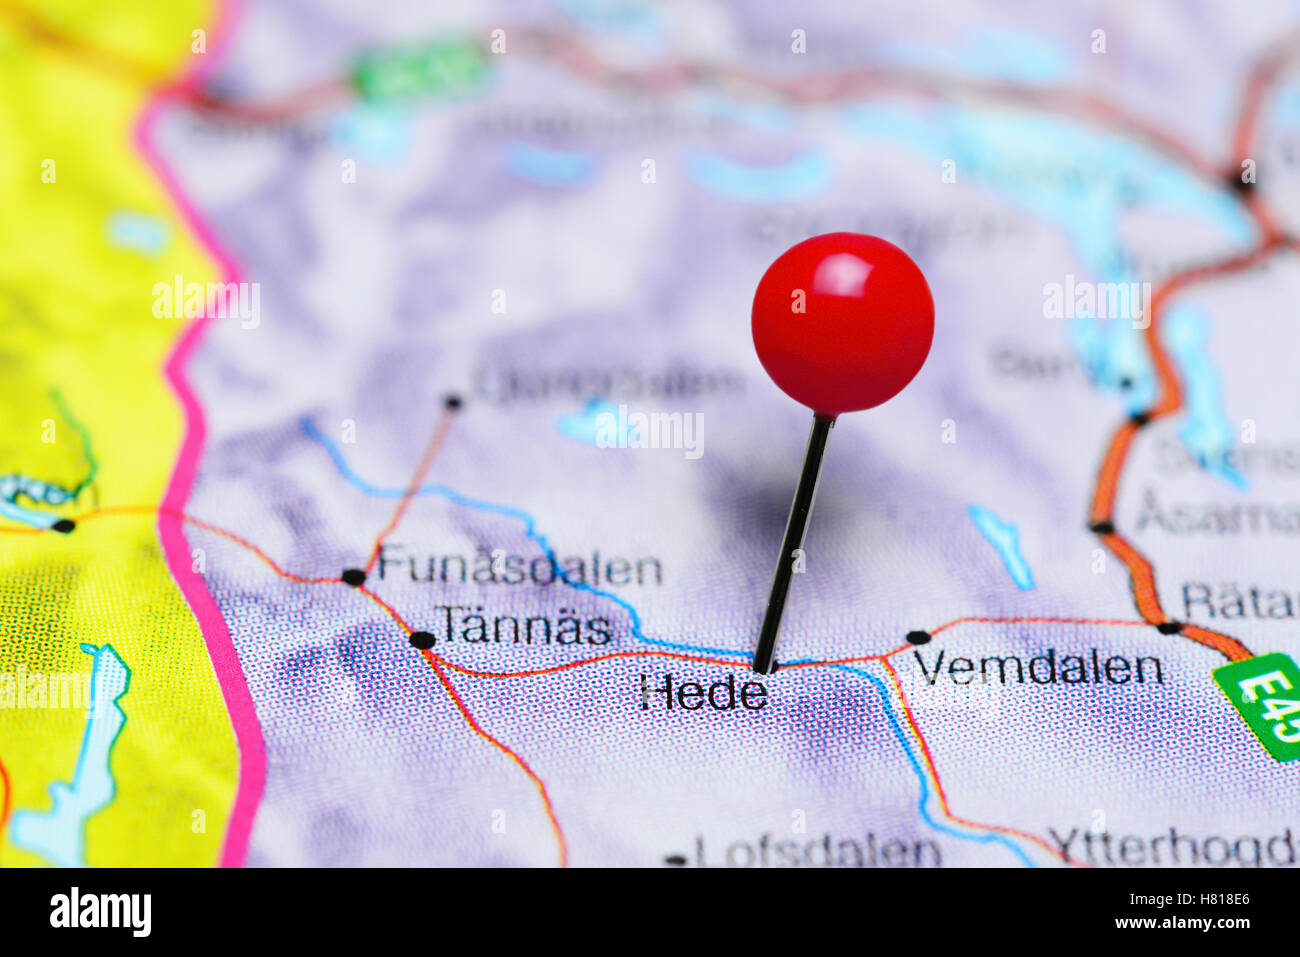 Hede pinned on a map of Sweden Stock Photo